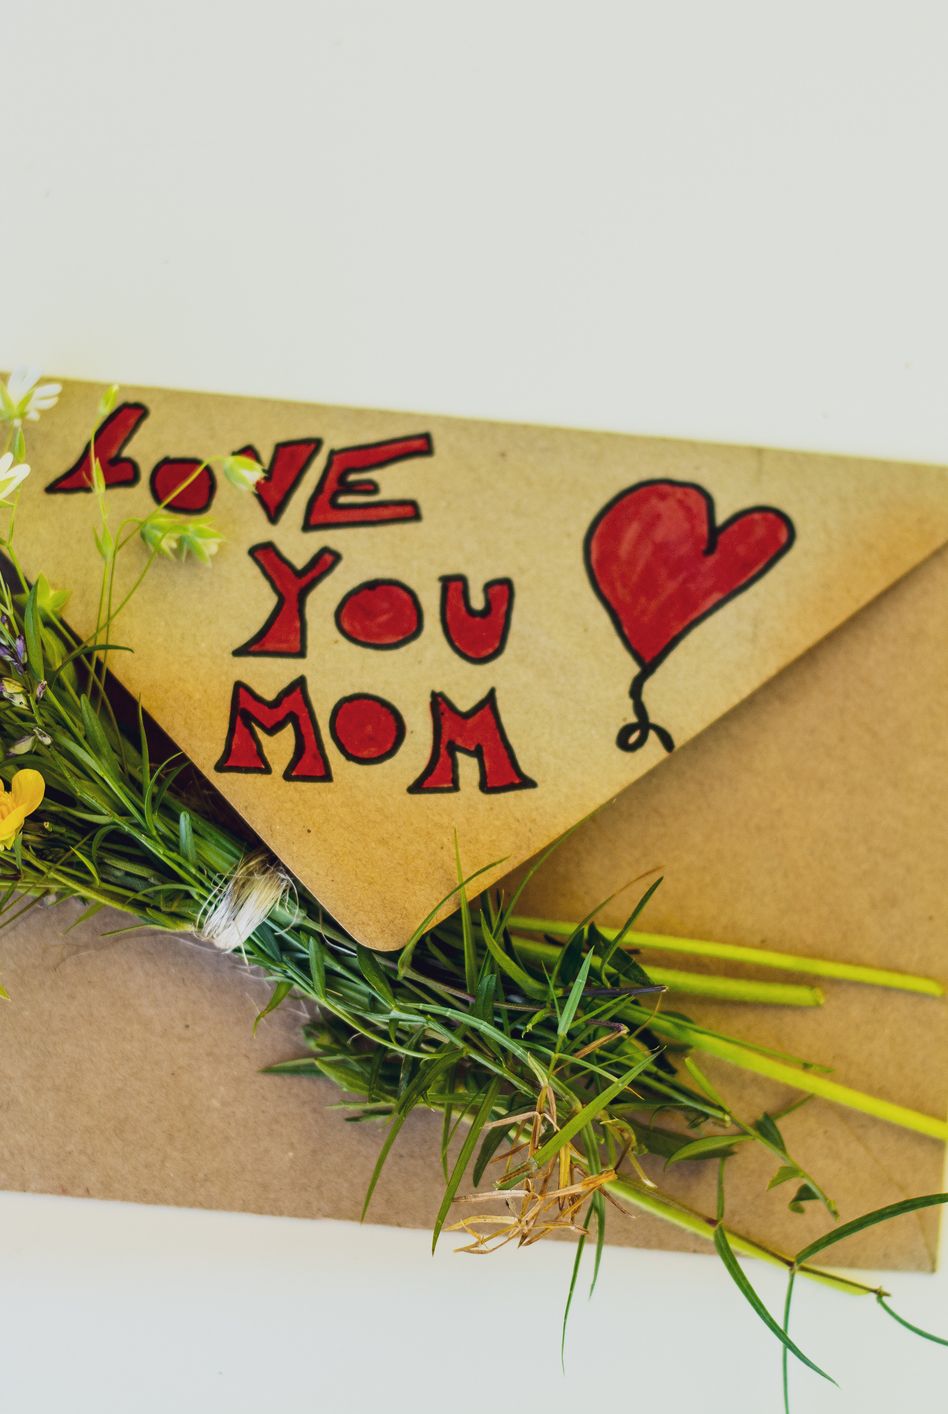 Mother's Day greeting envelope and bouquet of flowers on white background